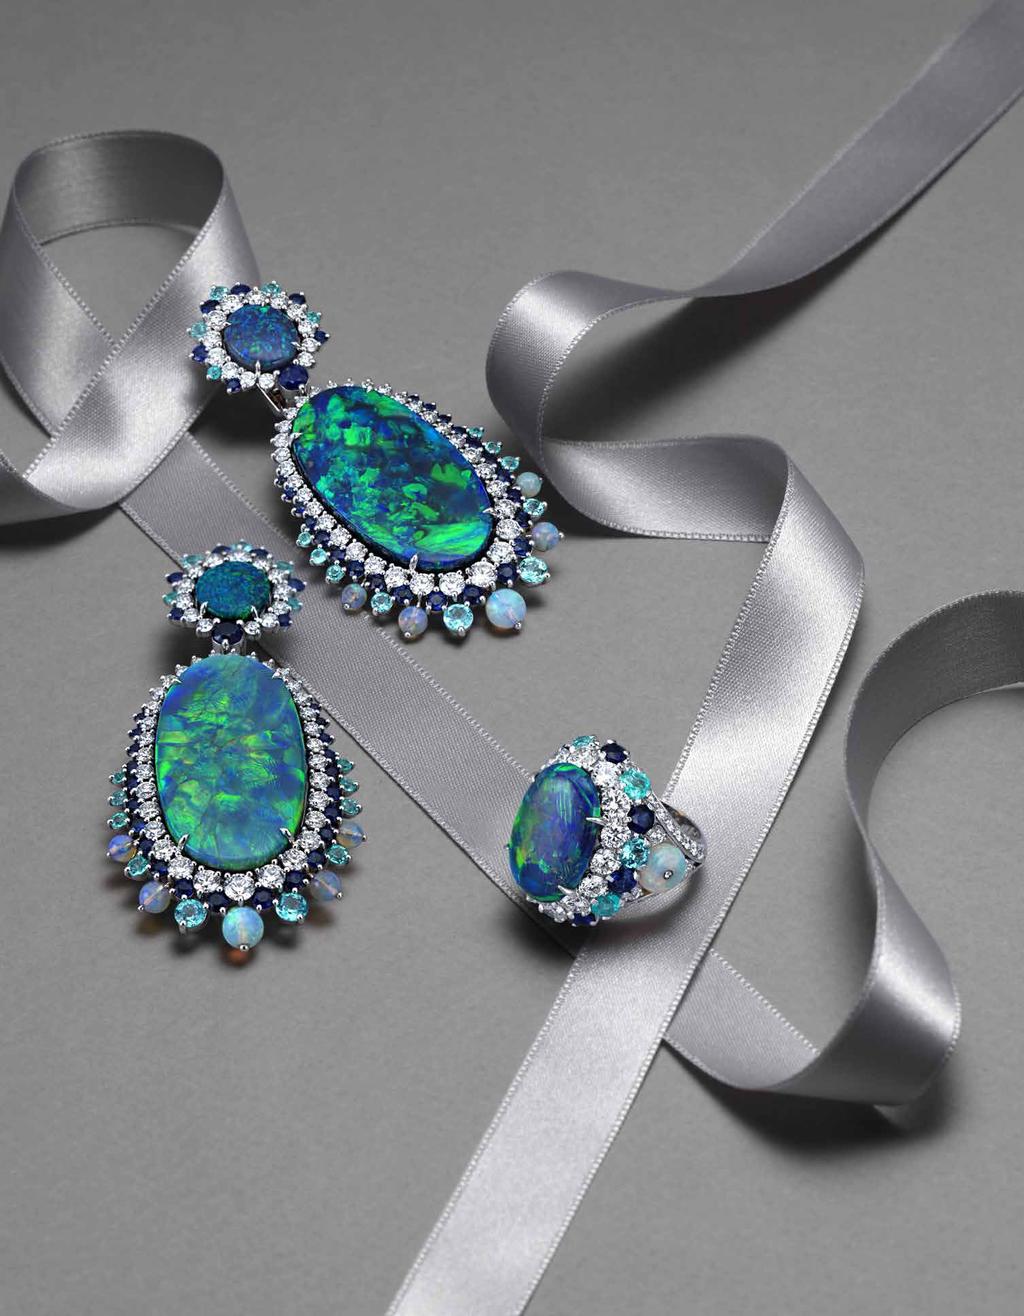 Important 18K white gold Set composed of earrings with 74.14 carats of black opals, blue sapphires, Paraiba tourmalines and white diamonds; and of a ring with an incredibly rare 16.